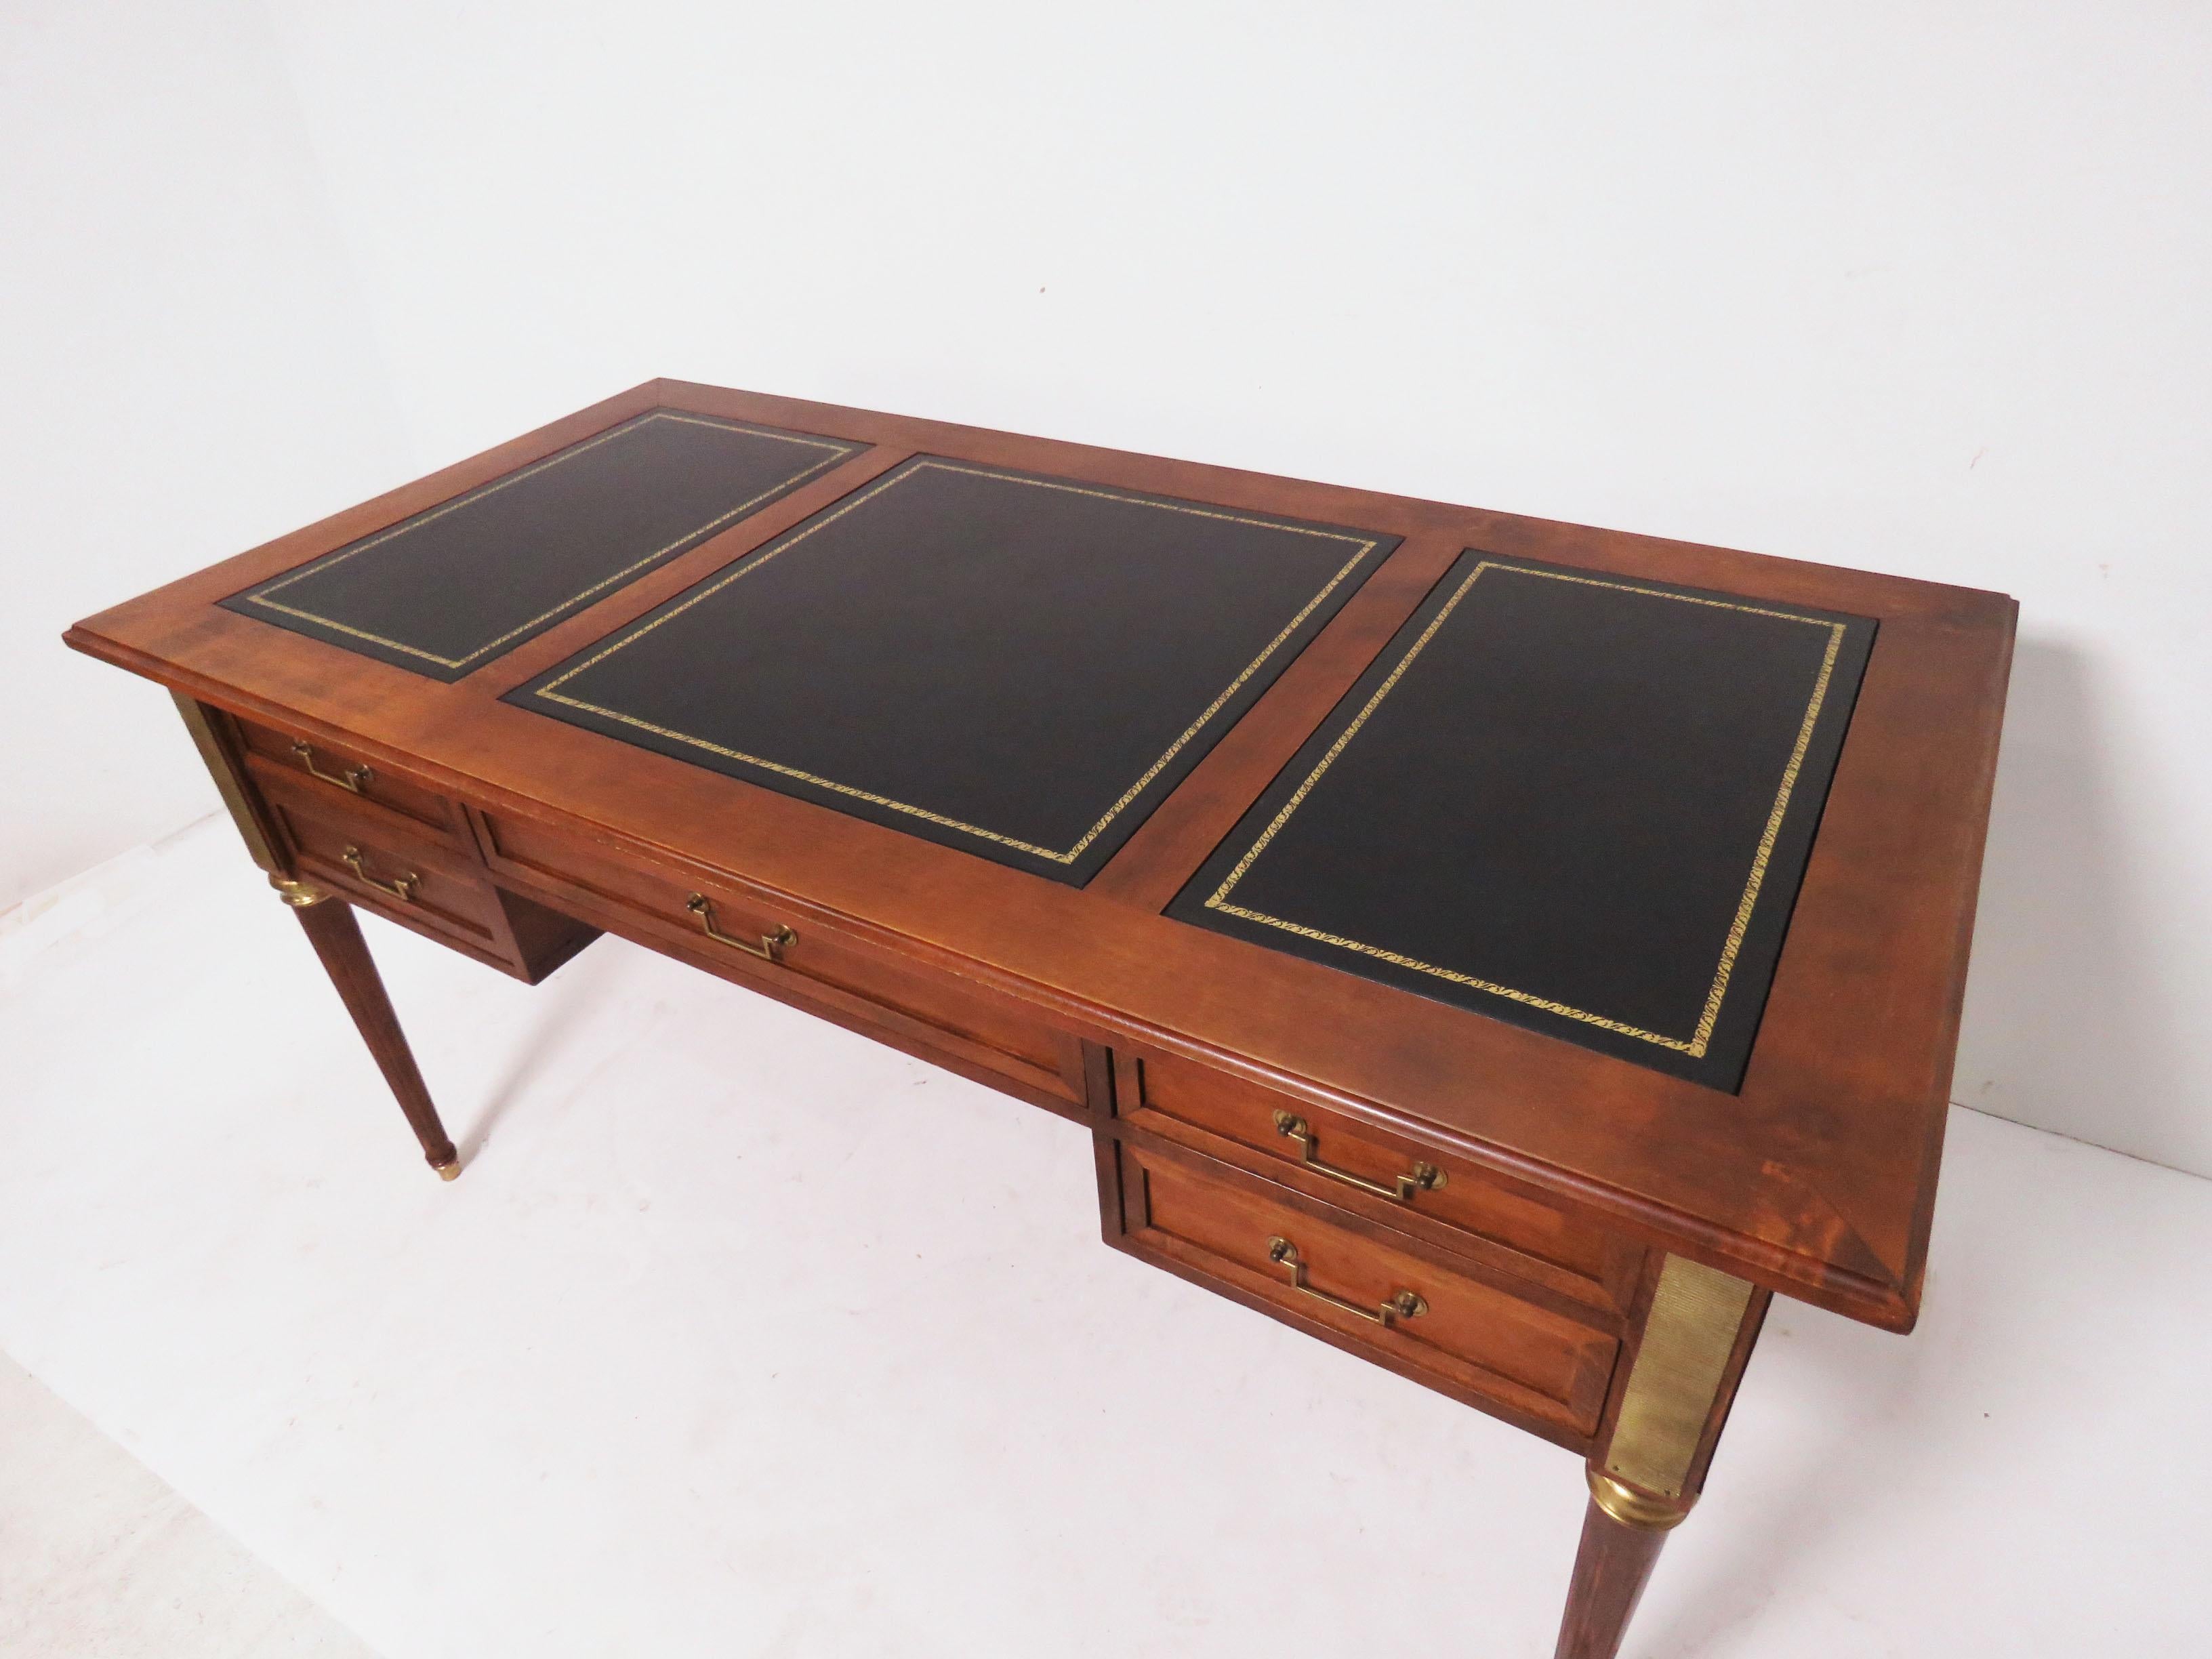 Executive writing desk in a modern adaptation of the neoclassical style, in walnut with combed brass ormolu adornments and embossed leather paneled surfaces, made in Italy, circa 1960s.